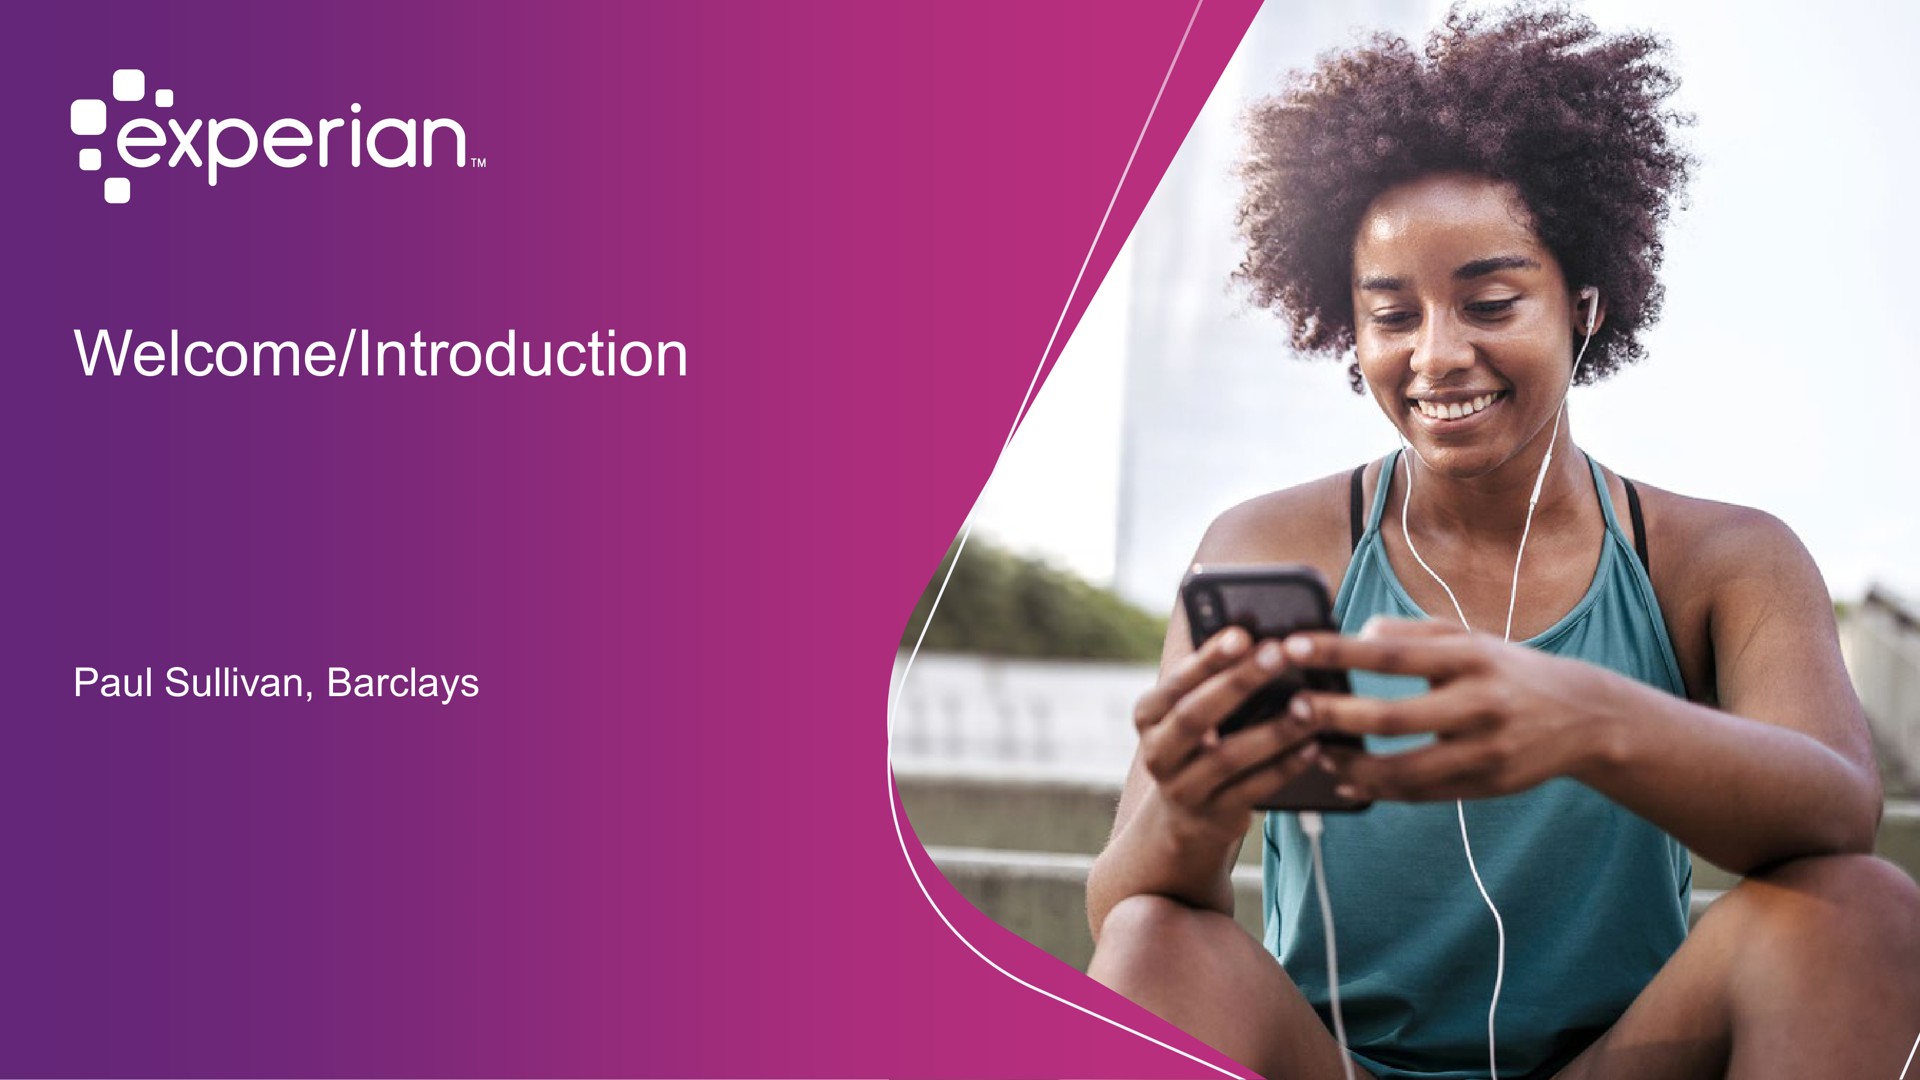 welcome introduction | Experian